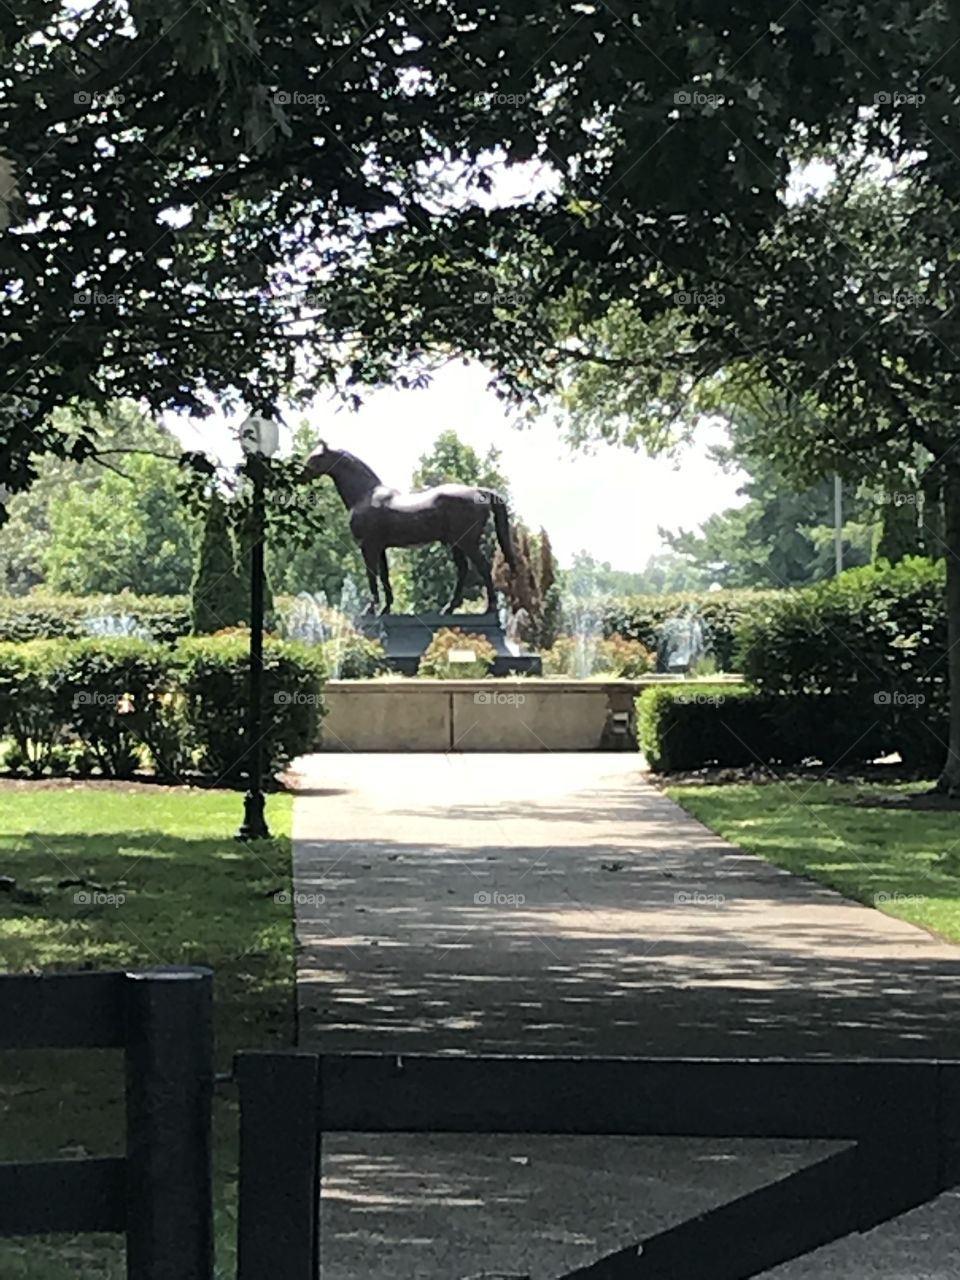 Remembering legends of the past at the Kentucky Horse Park.